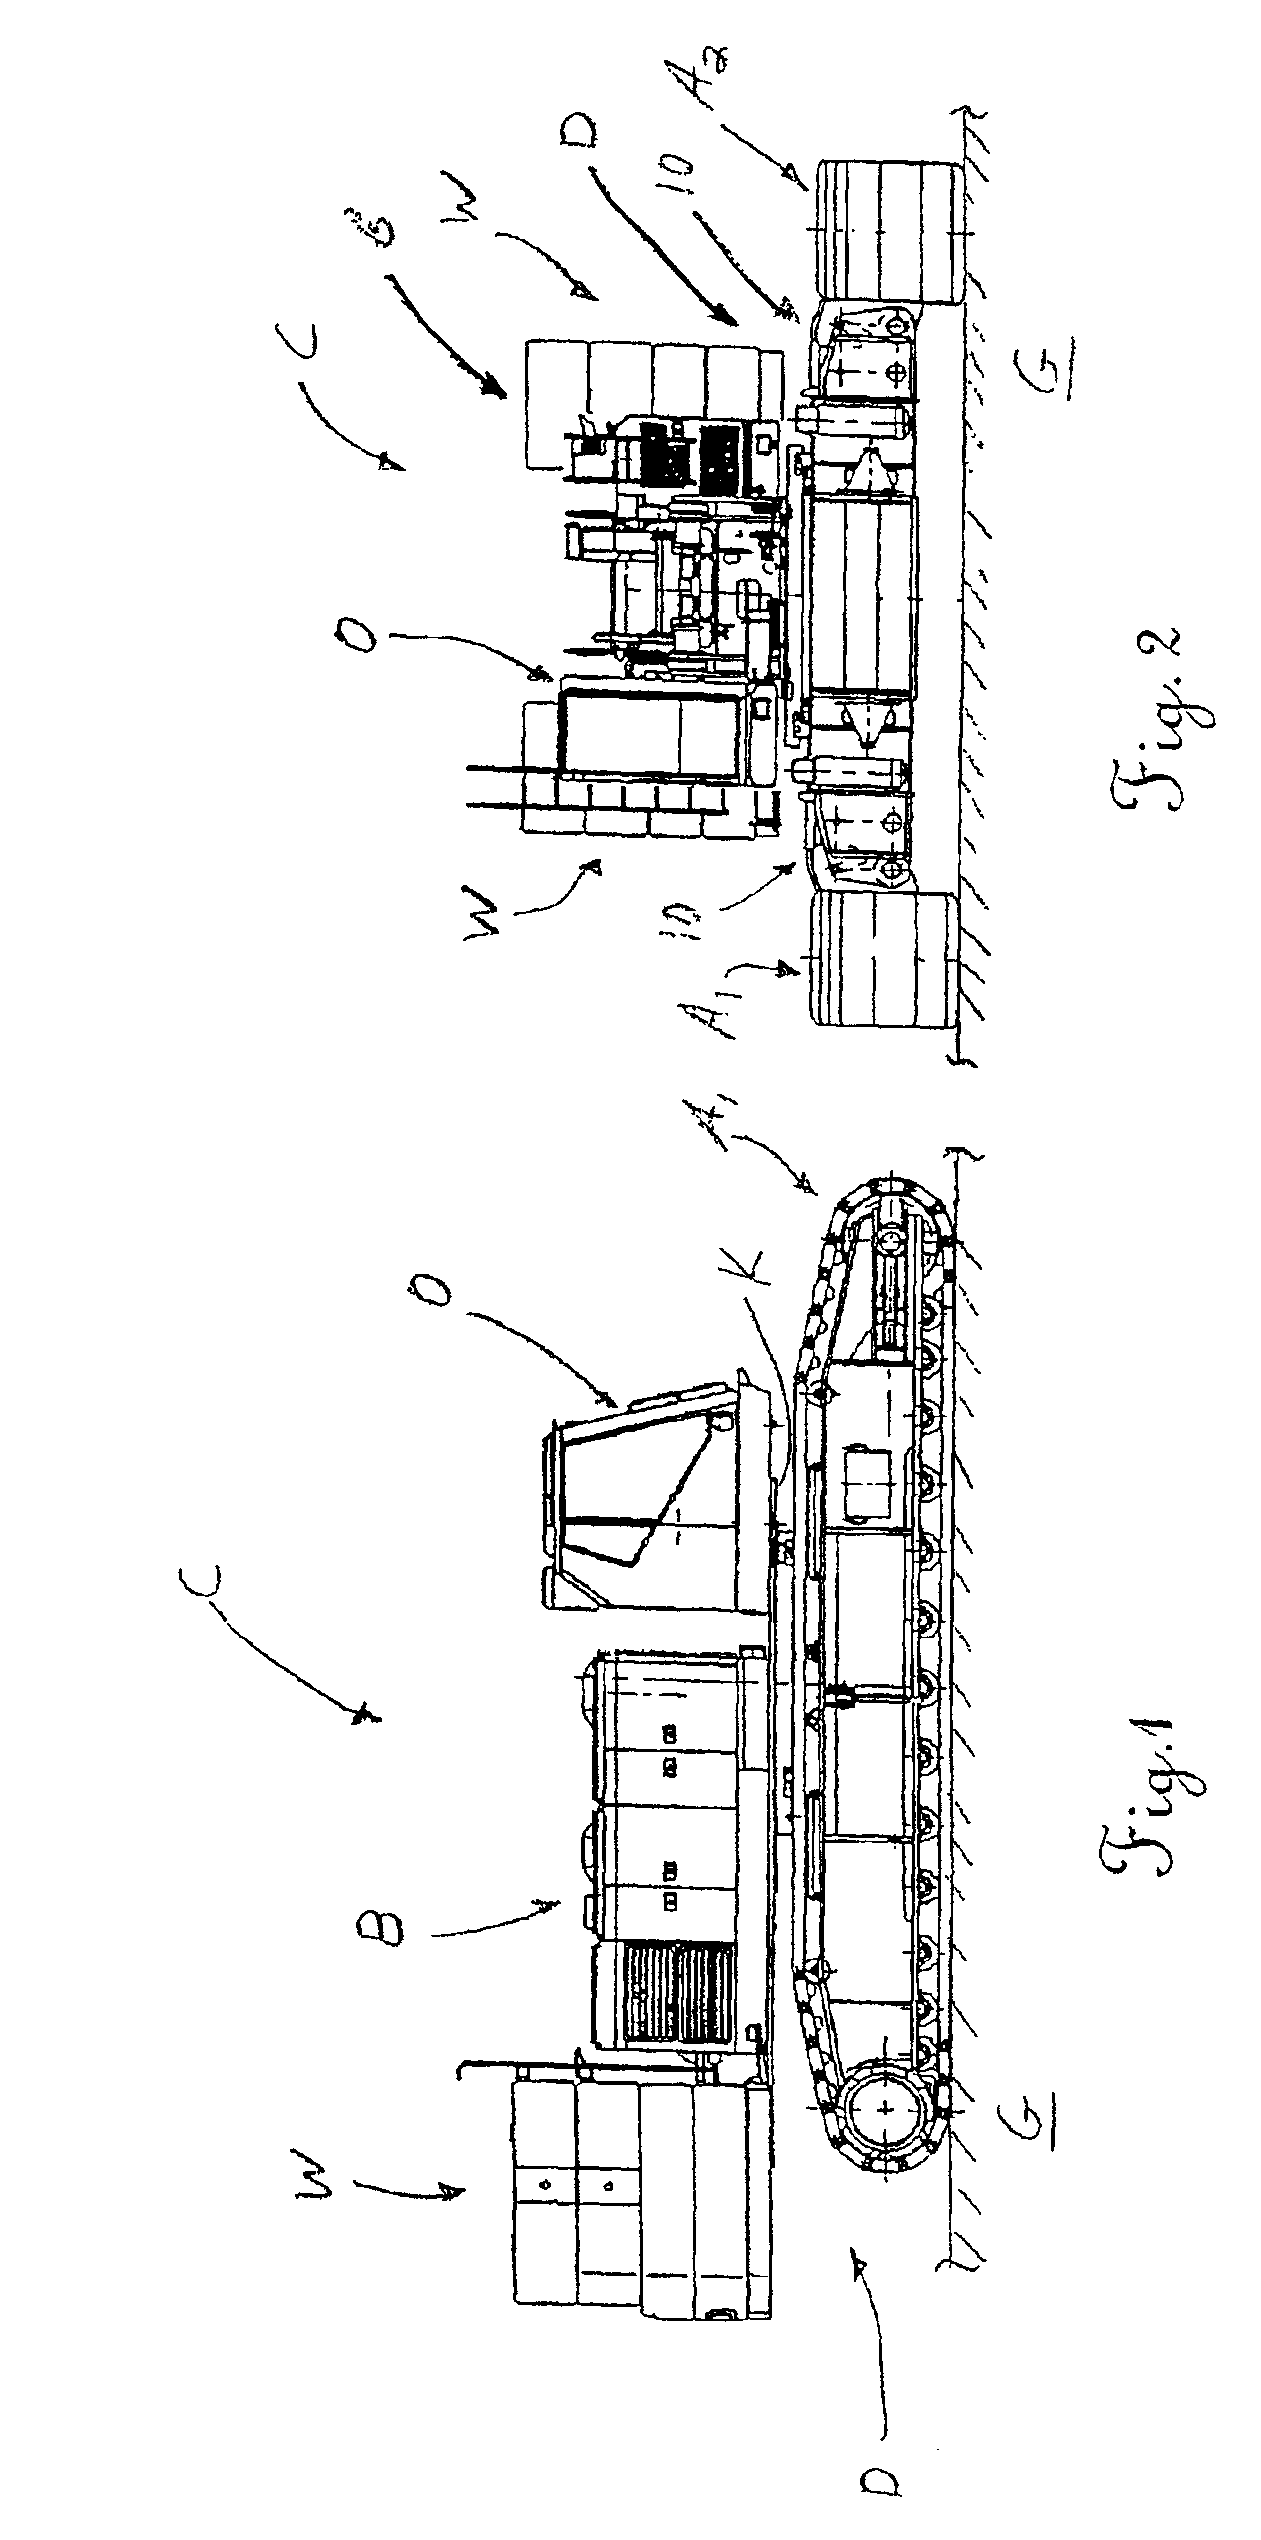 Systems for connecting a ground-engaging motive device to a vehicle and related methods